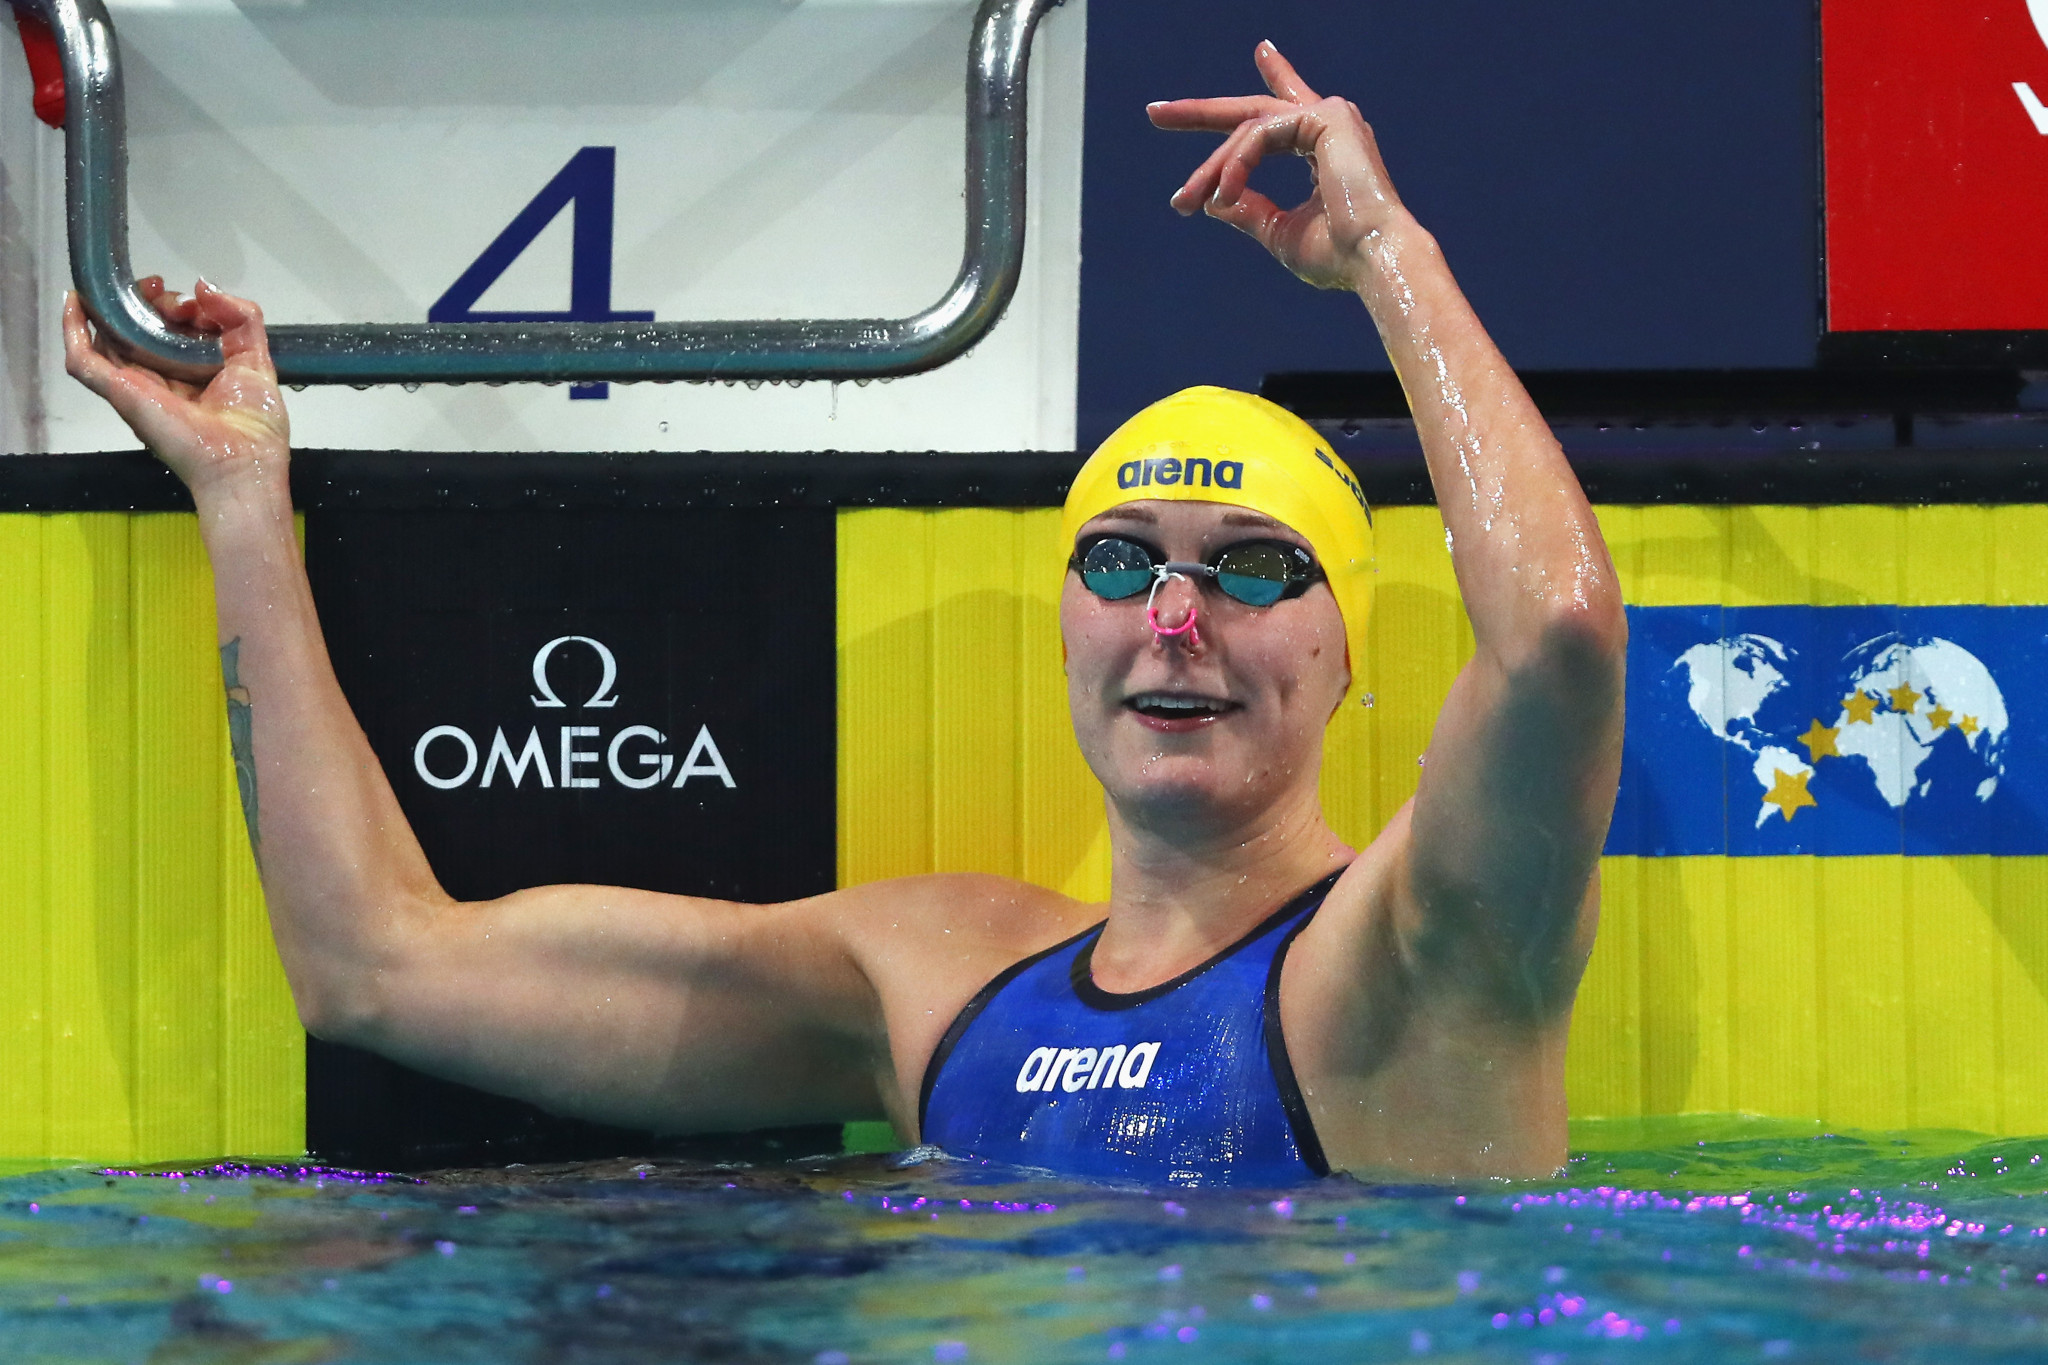 Sarah Sjostrom won both the 100m butterfly and 100m freestyle today, taking the former in a record breaking time ©Getty Images